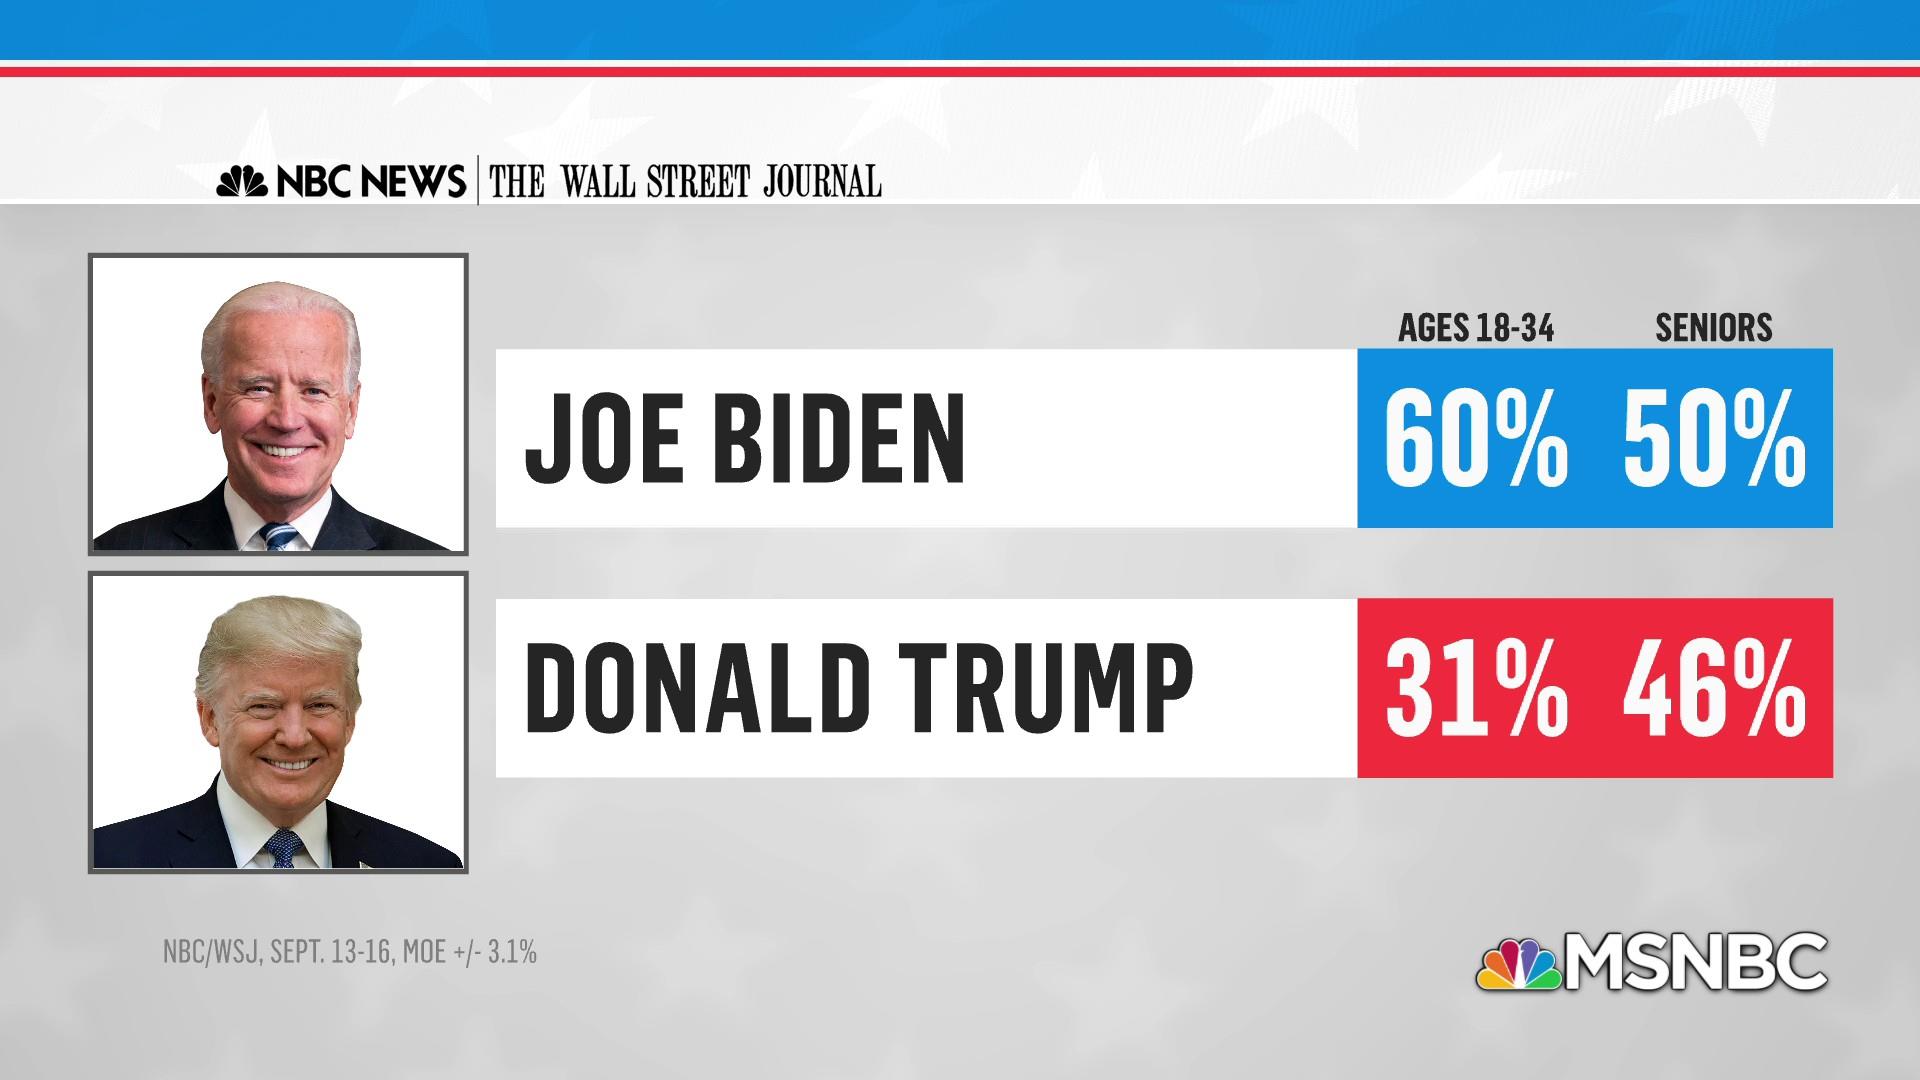 sandhed Rationalisering Klinik After a tumultuous month of news, Biden maintains national lead over Trump